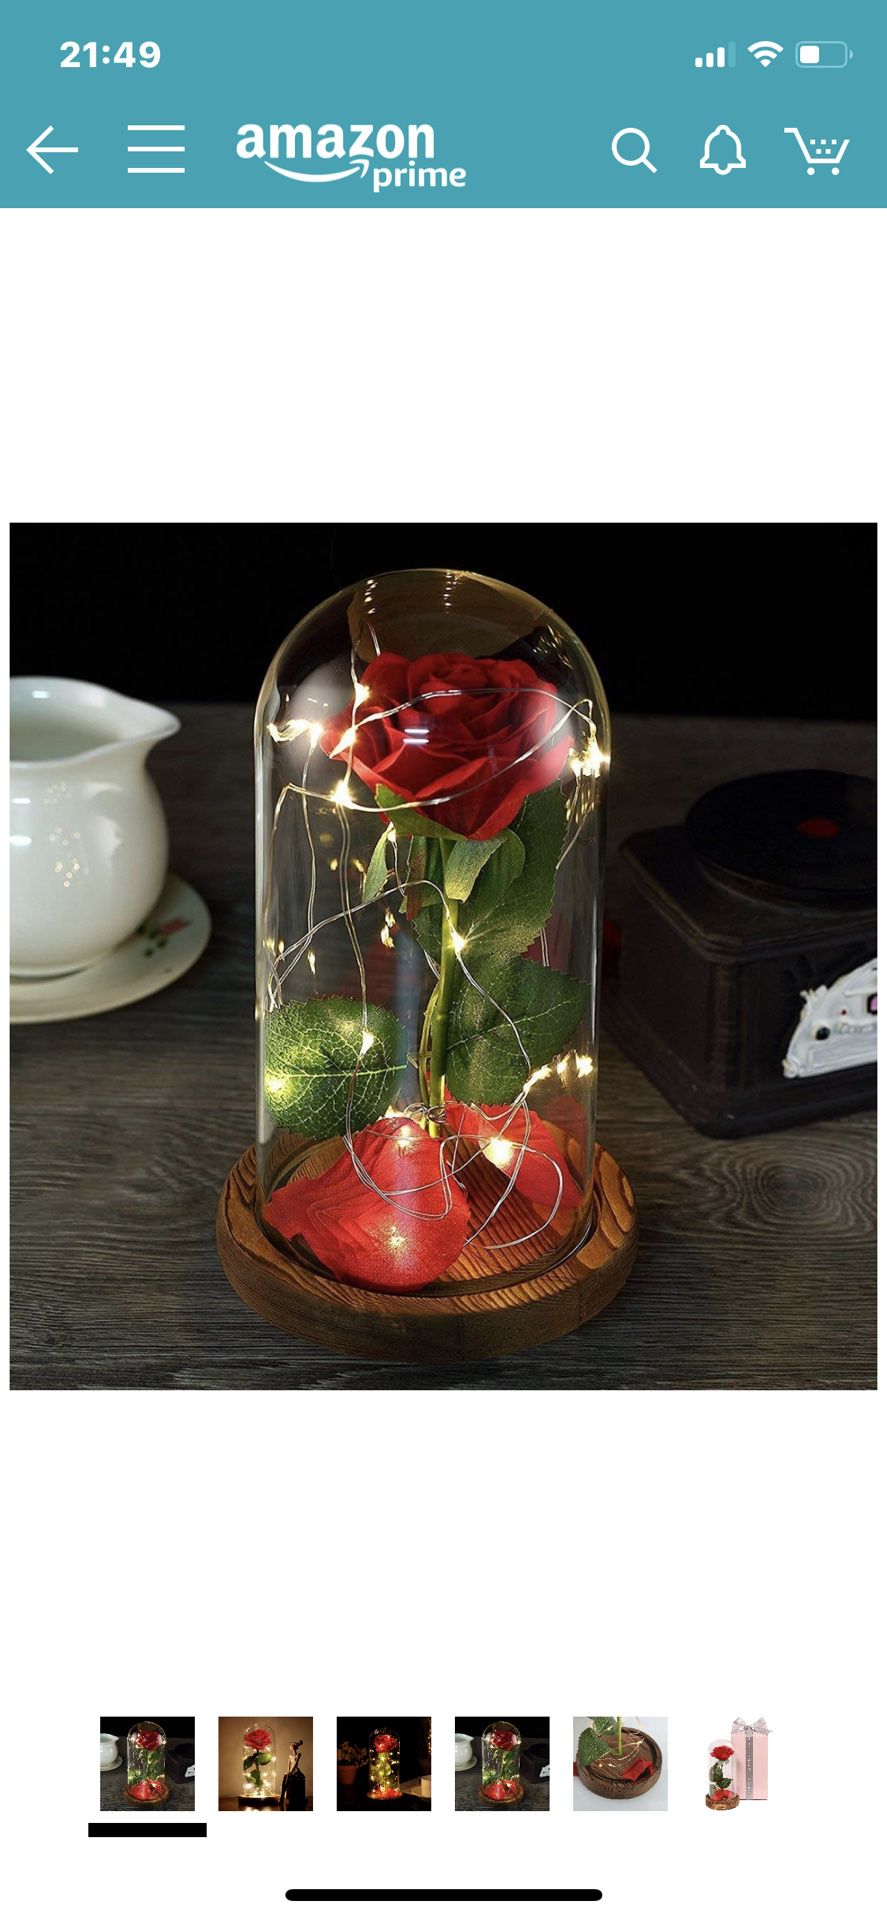 Beauty and the Beast Rose,Red Silk Rose Flower with Fallen Petals in a Glass,